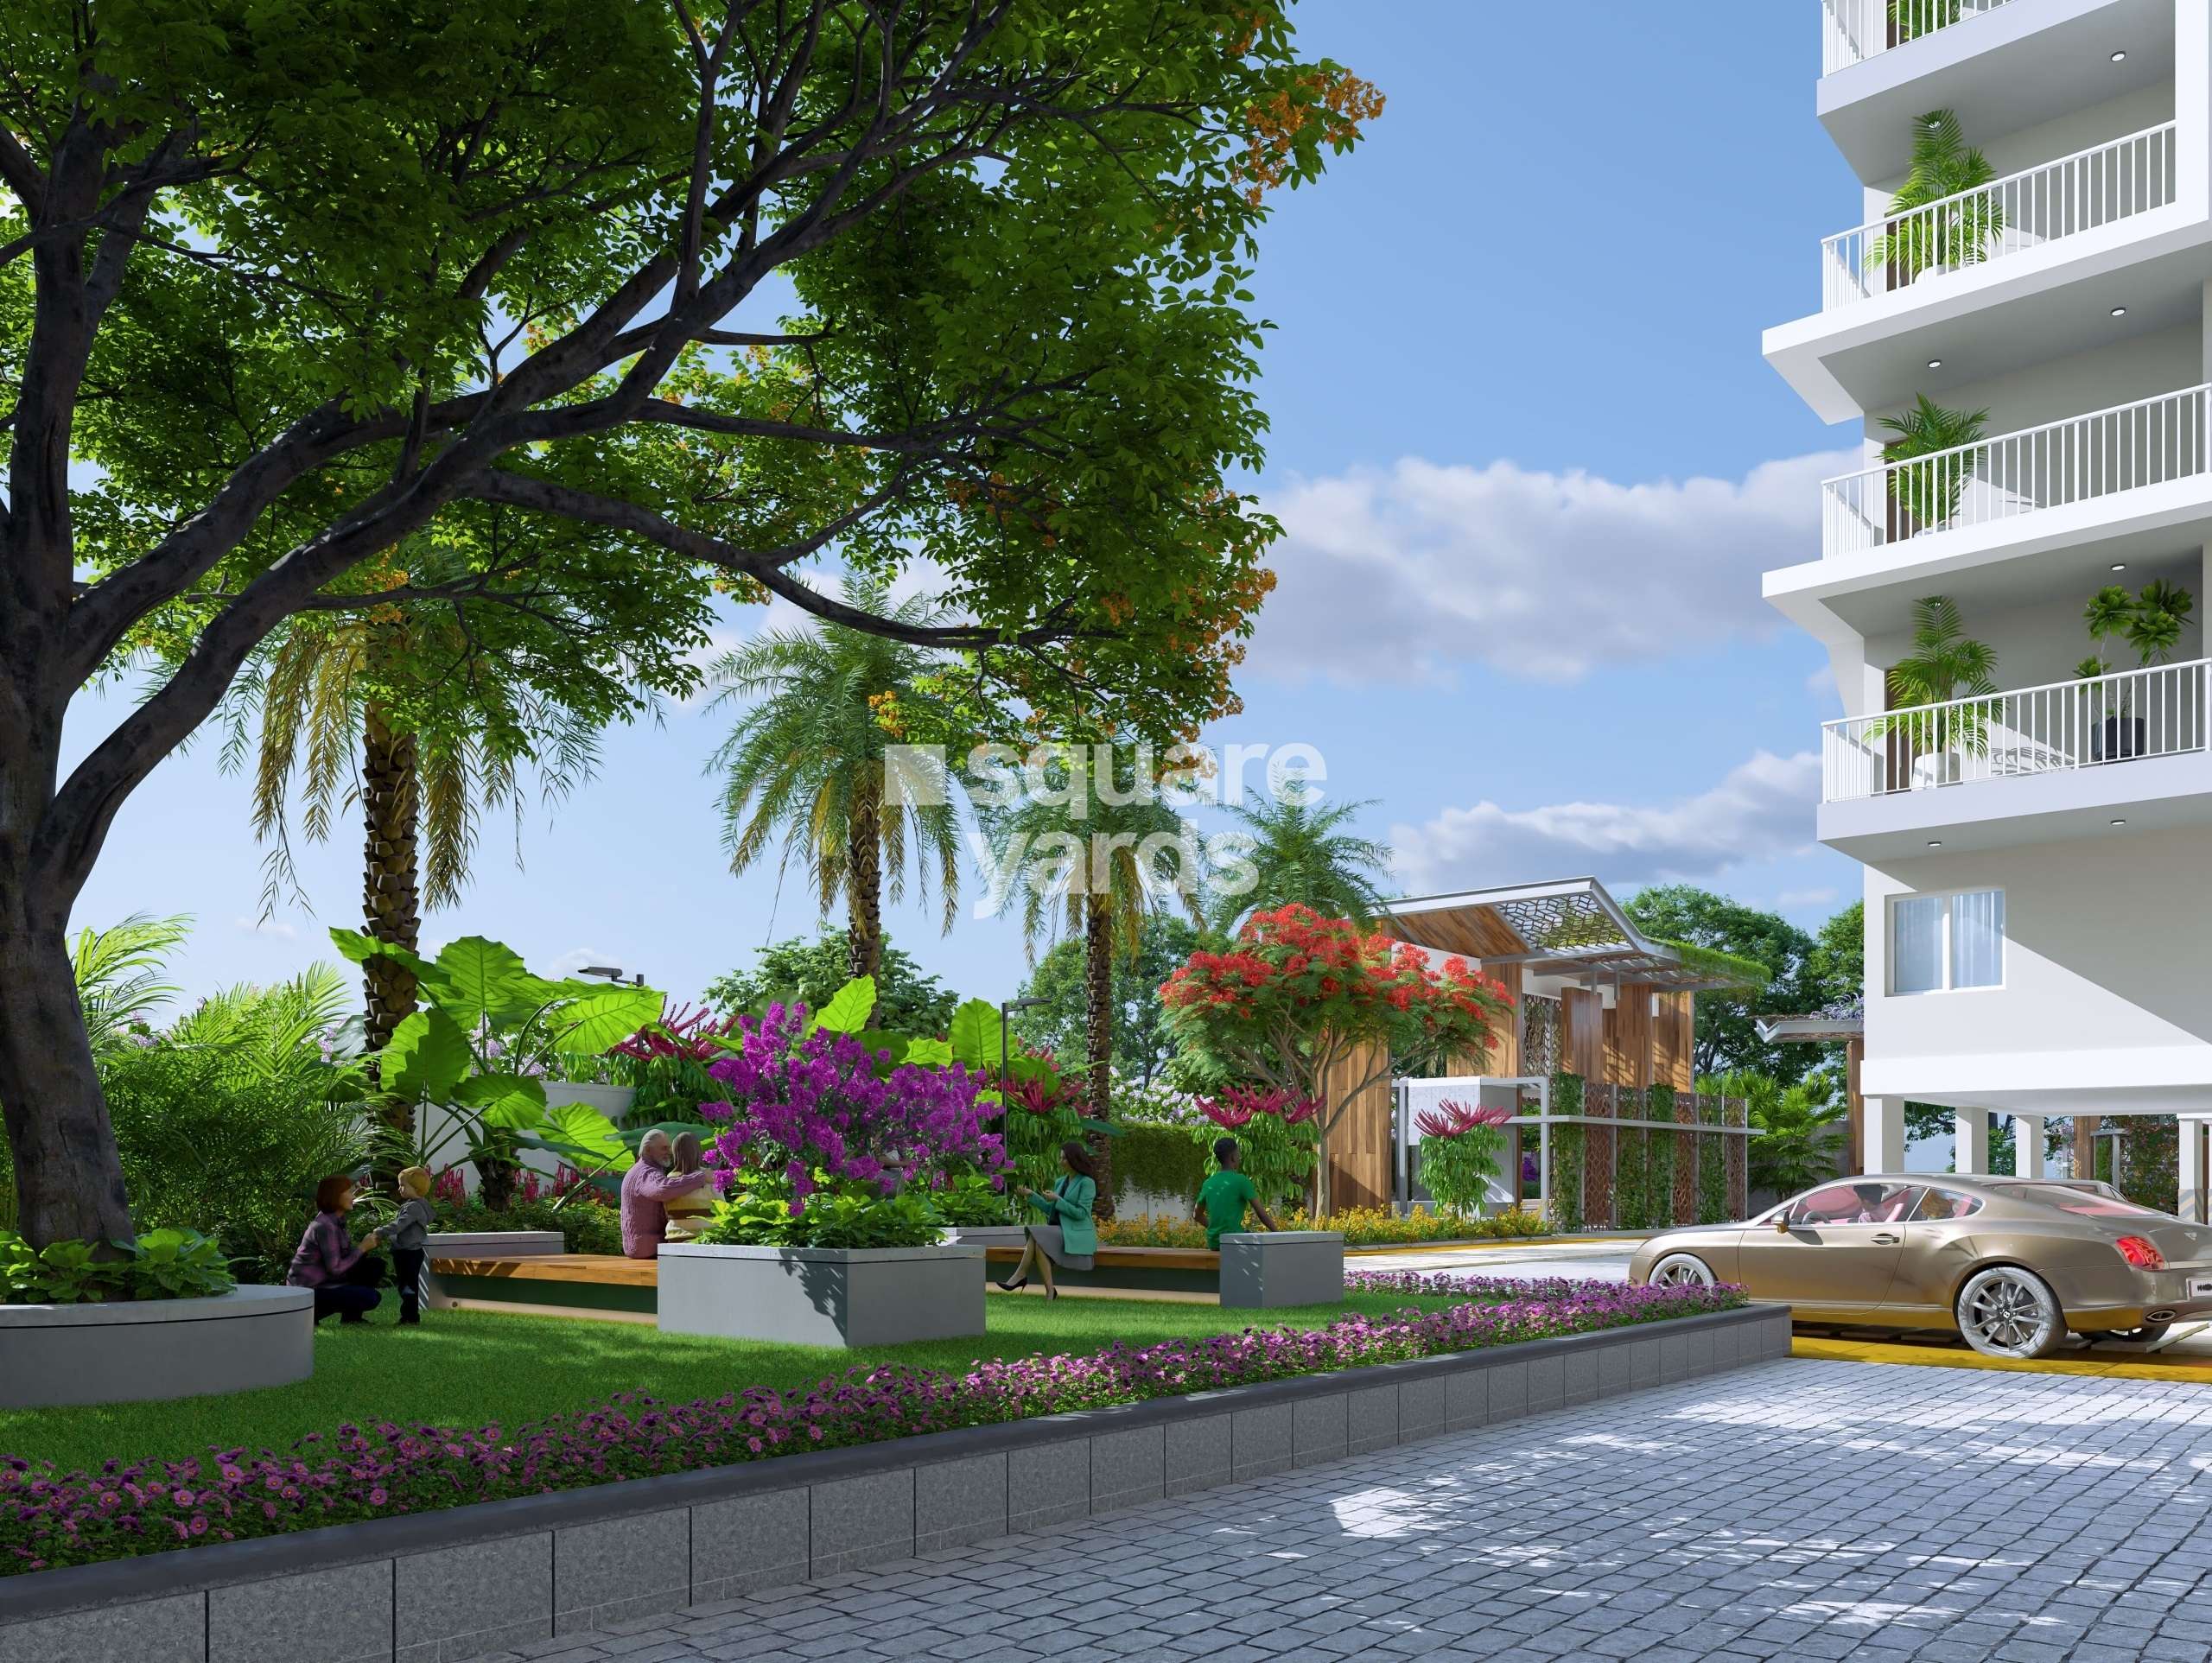 aaditris empire apartments project amenities features13 6373